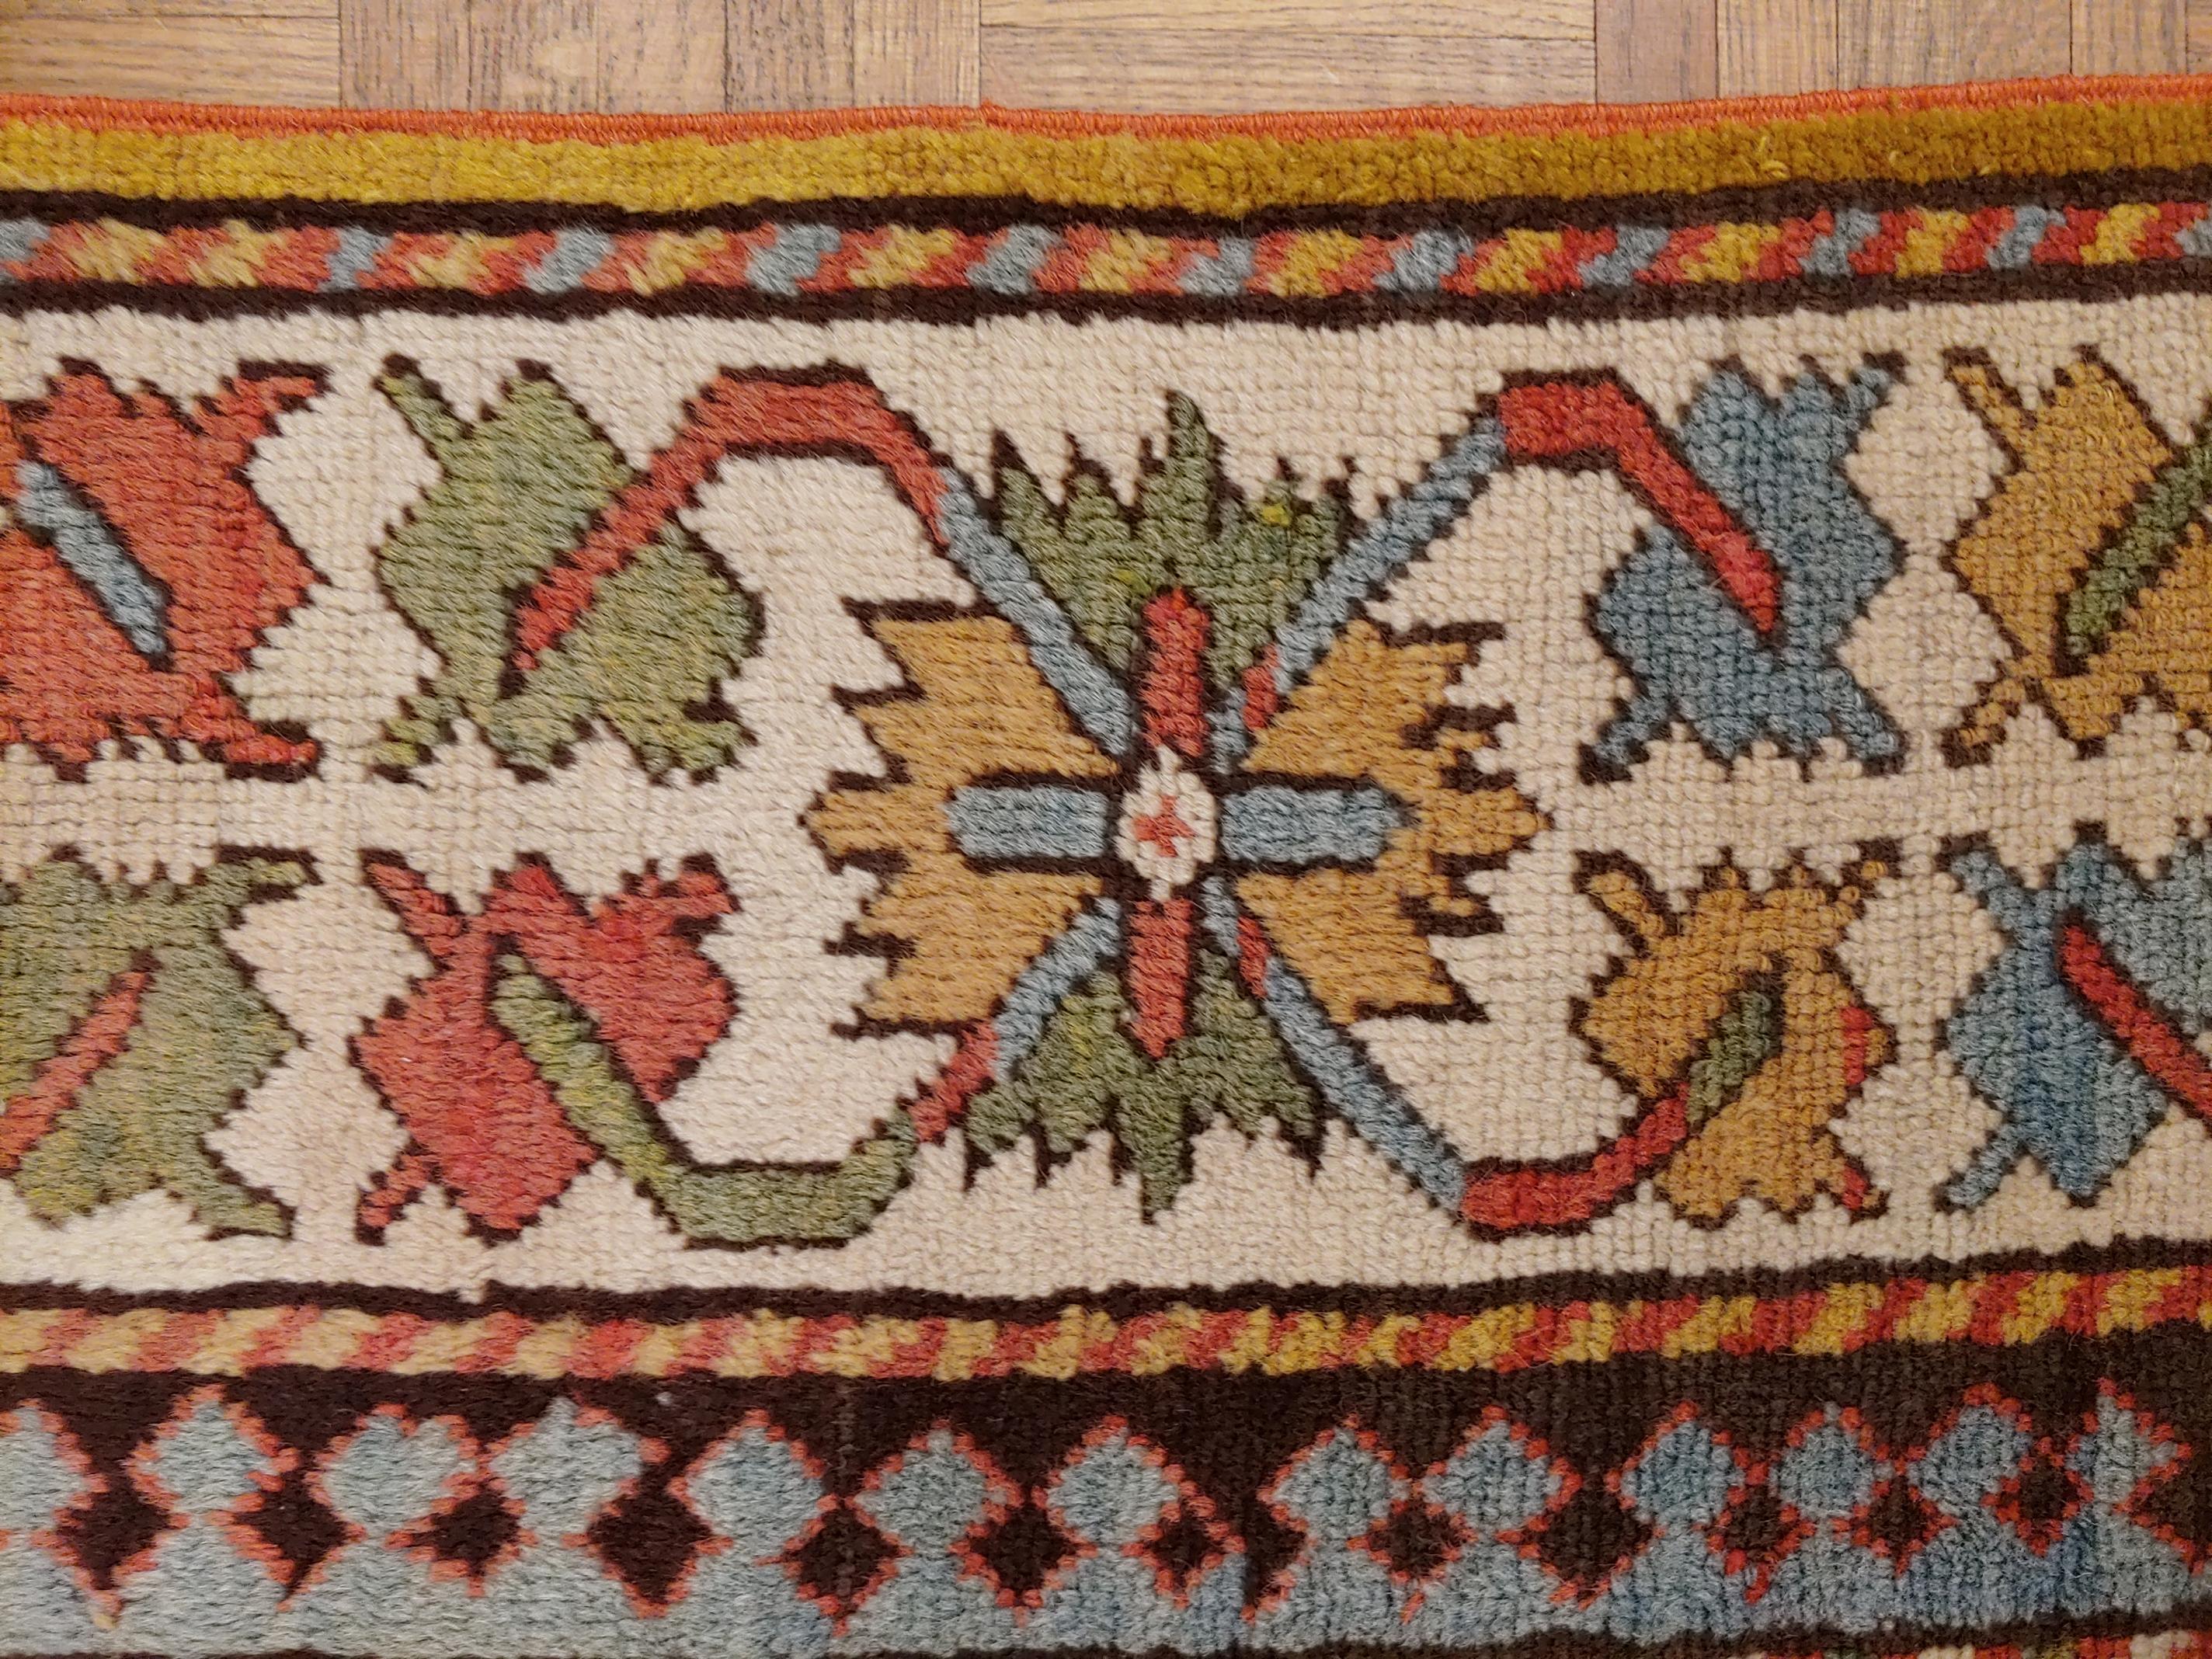 Antique Caucasian Karabagh Rug, Gold Field Ivory Border, Wool, Scatter Size In Good Condition For Sale In Williamsburg, VA